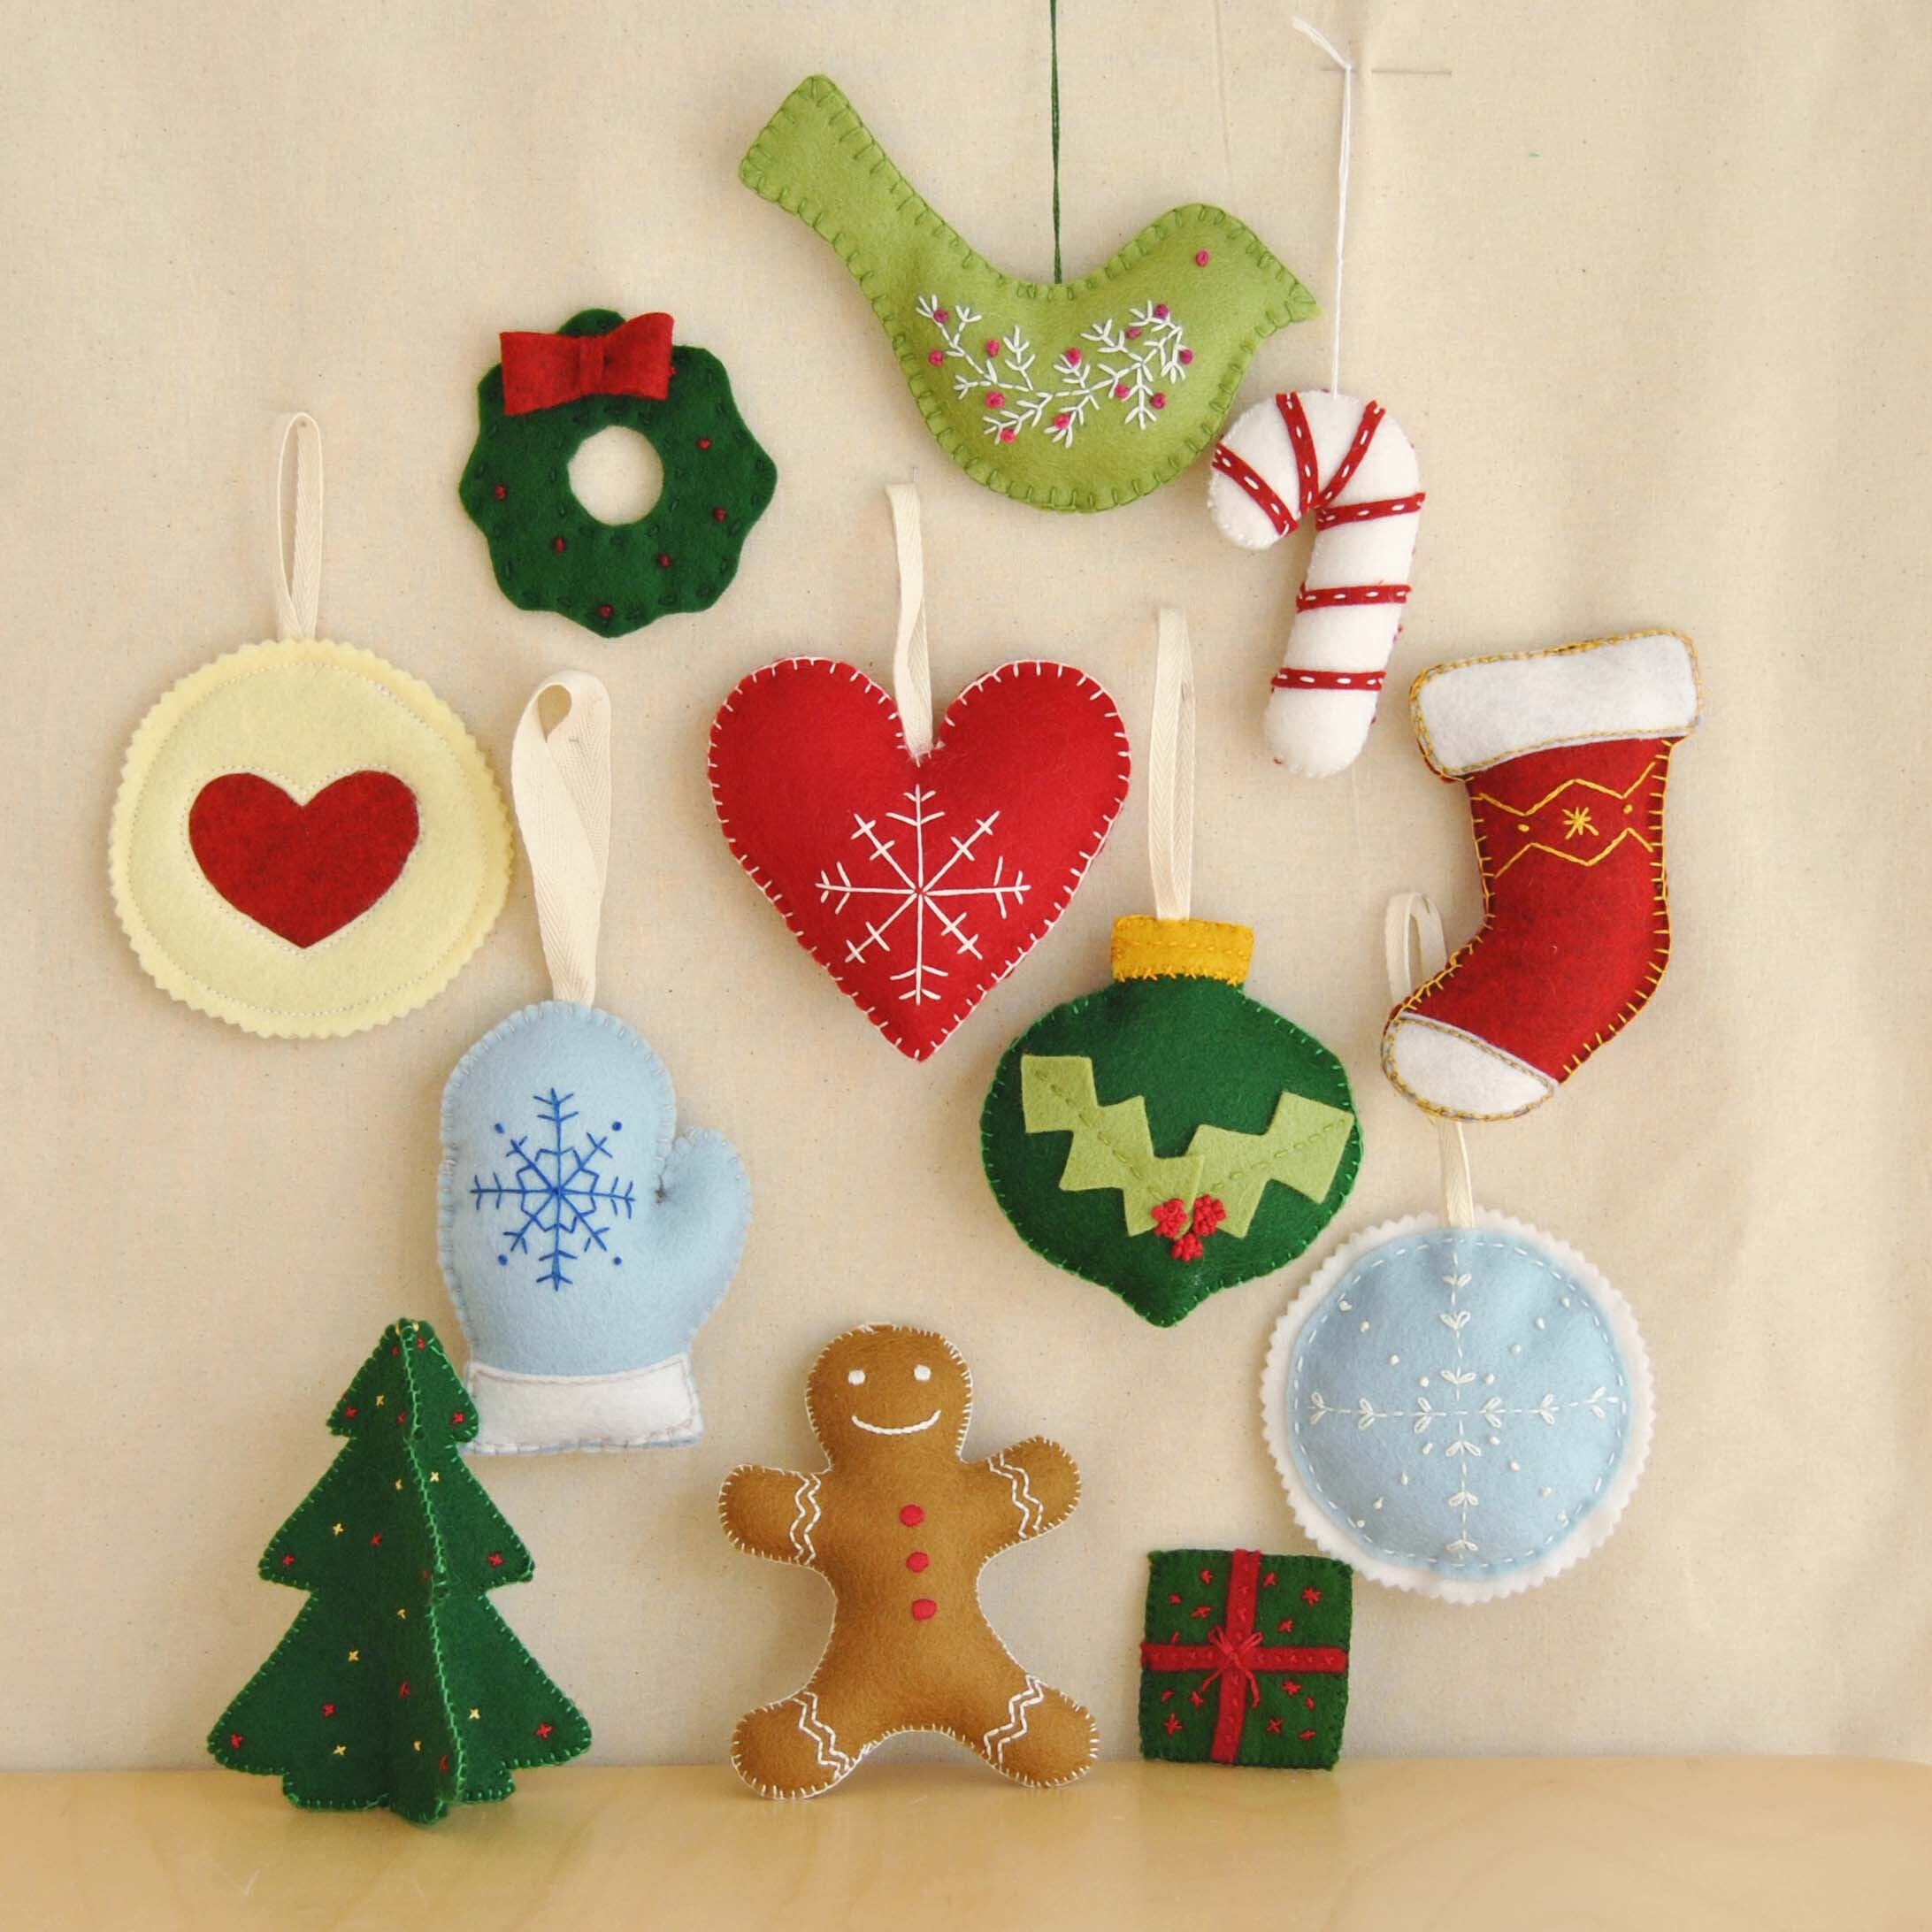 12 Days of Christmas 2022 - Embroidered Felt Ornaments Template ...